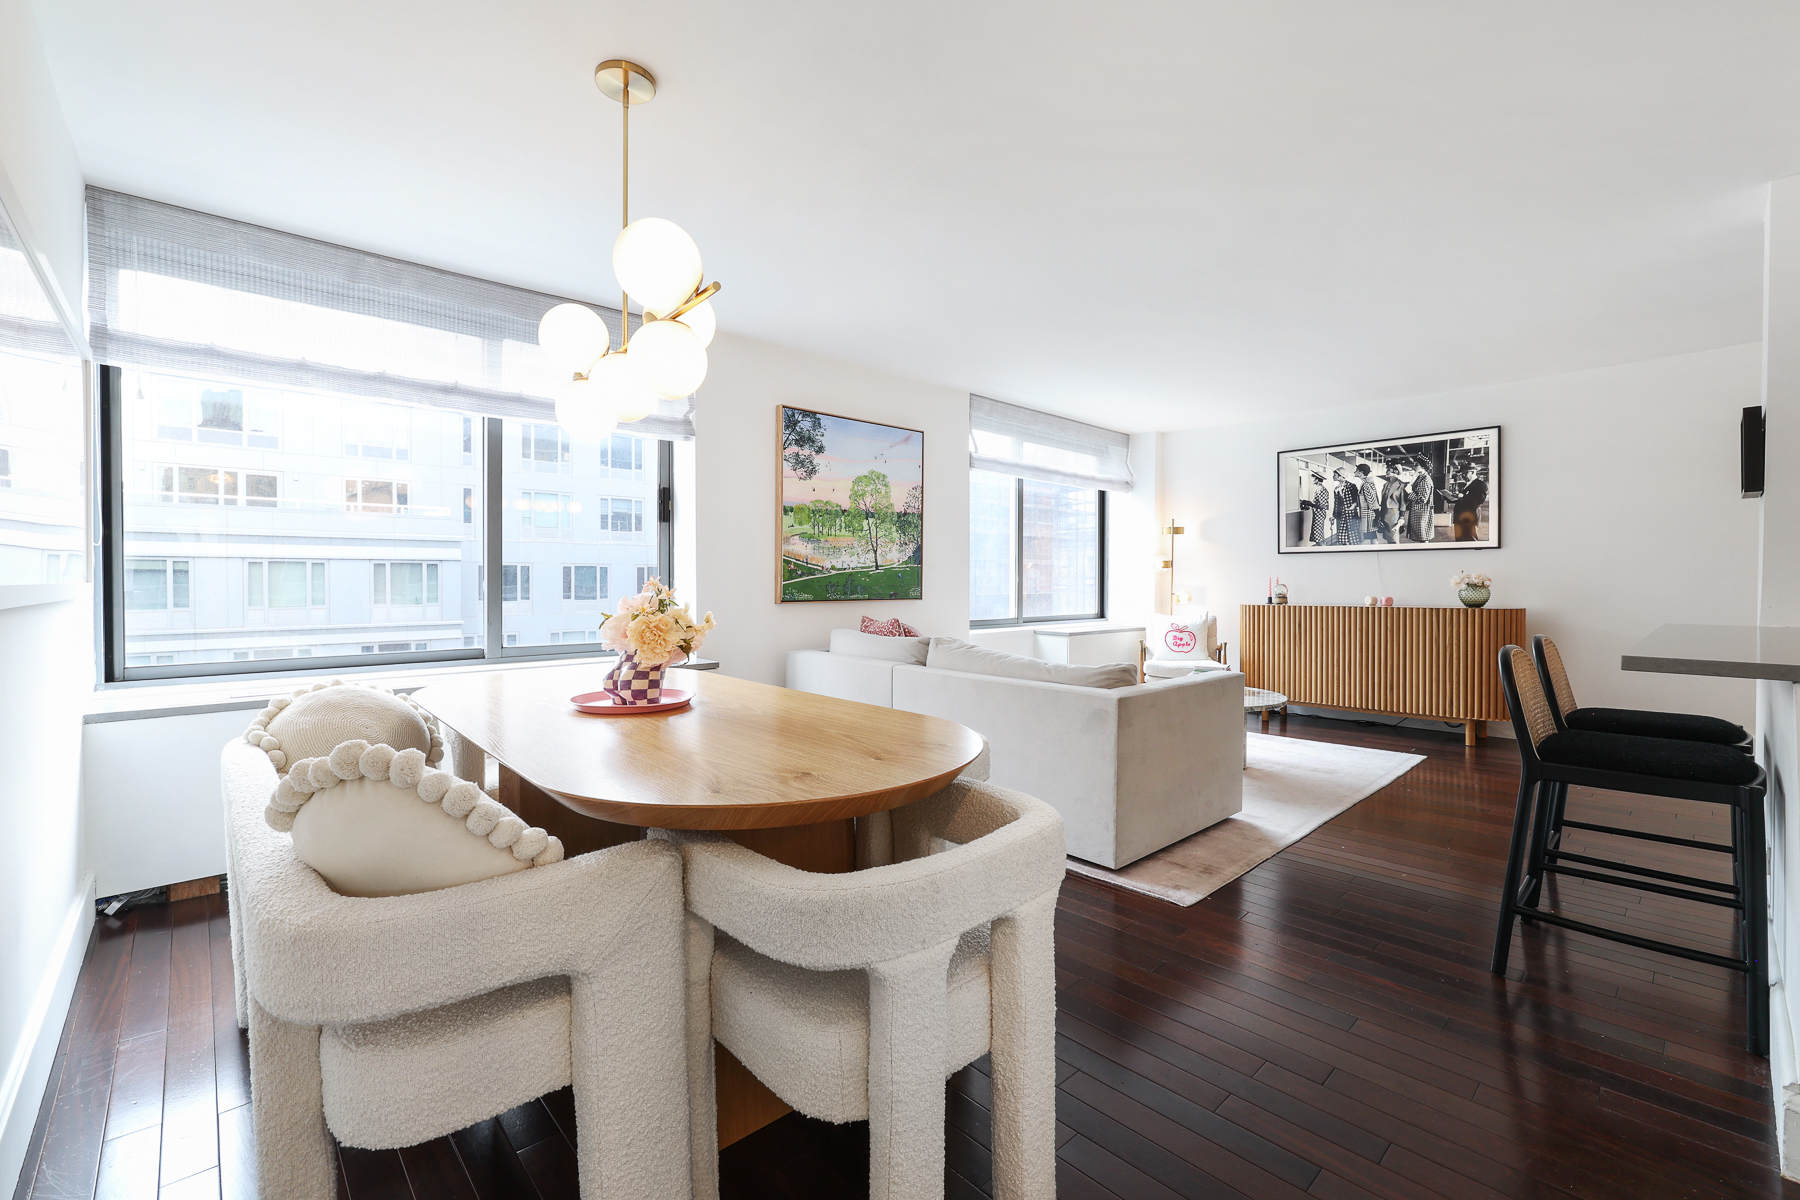 270 West 17th Street 5L, Hudson Yards-Chelsea-Flatiron-Union Square, Downtown, NYC - 2 Bedrooms  
2 Bathrooms  
5 Rooms - 